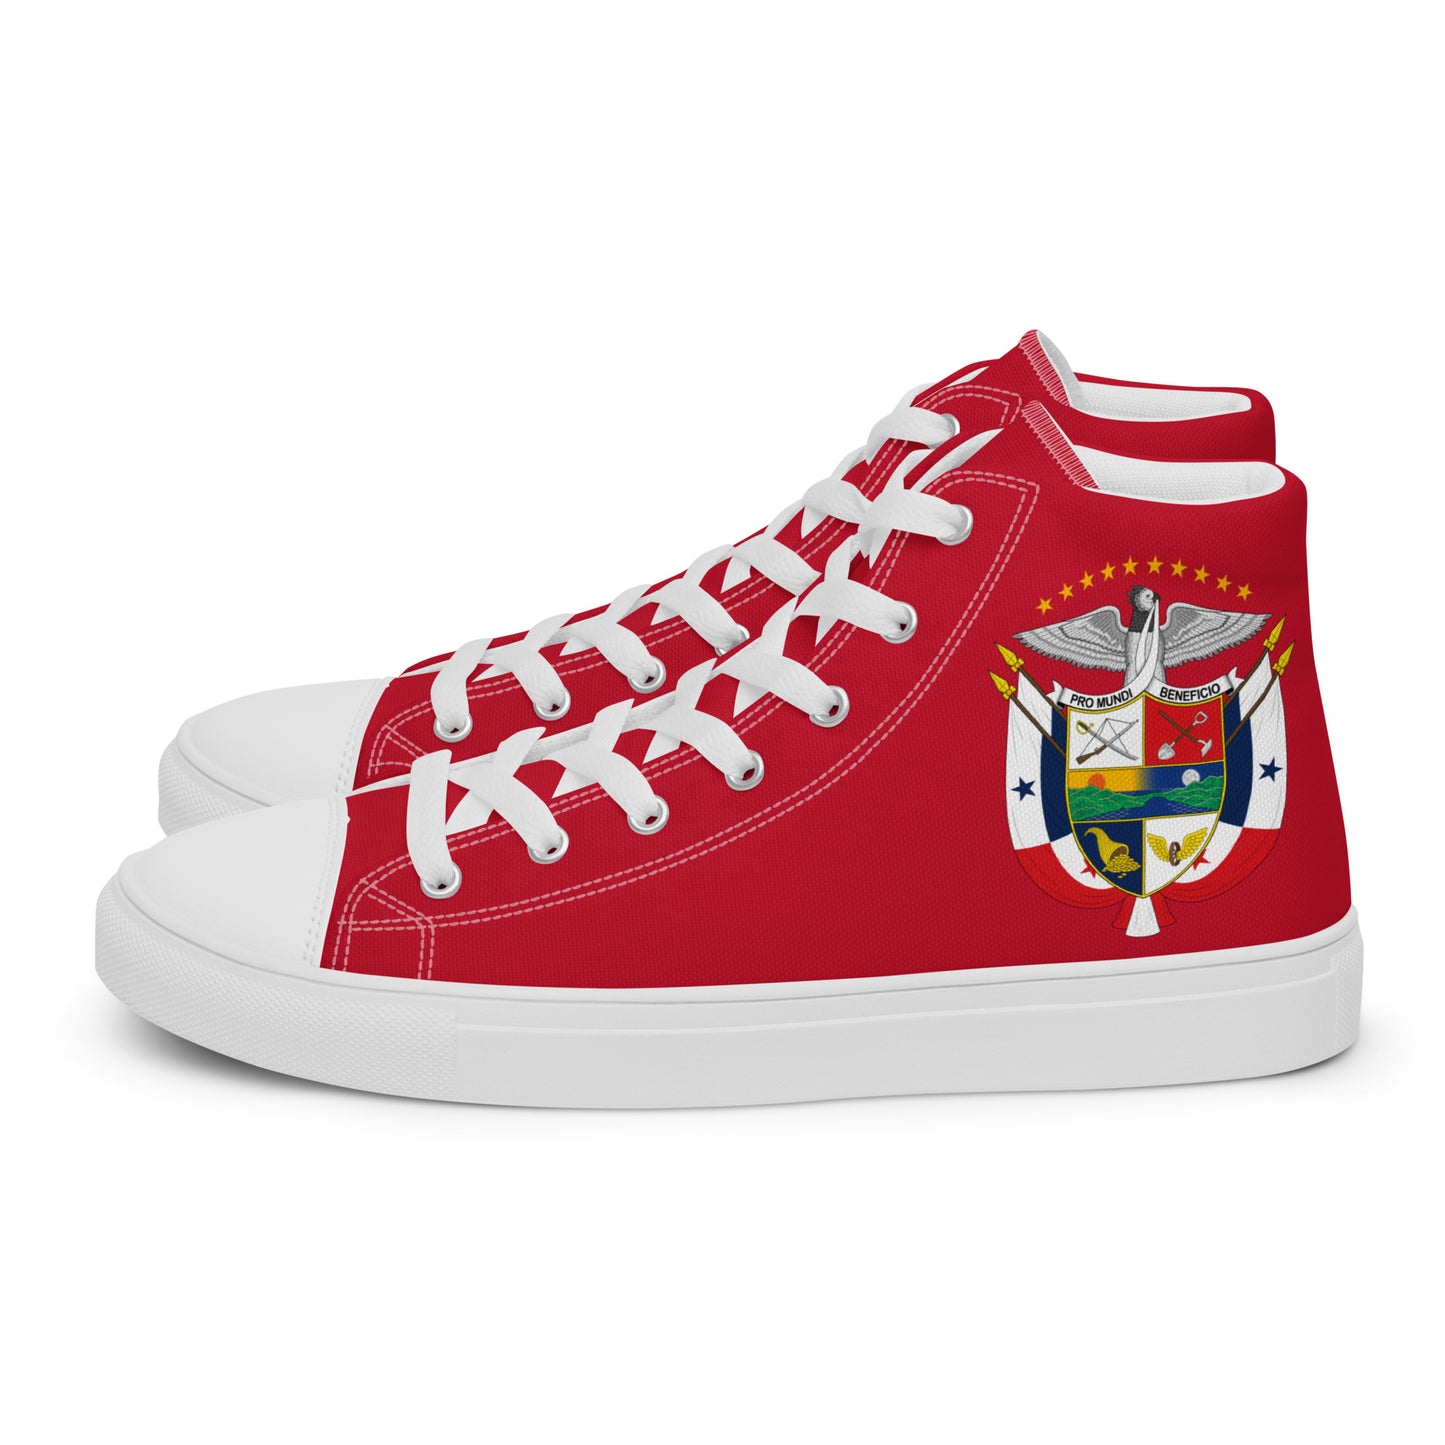 Panamá - Women - Red - High top shoes